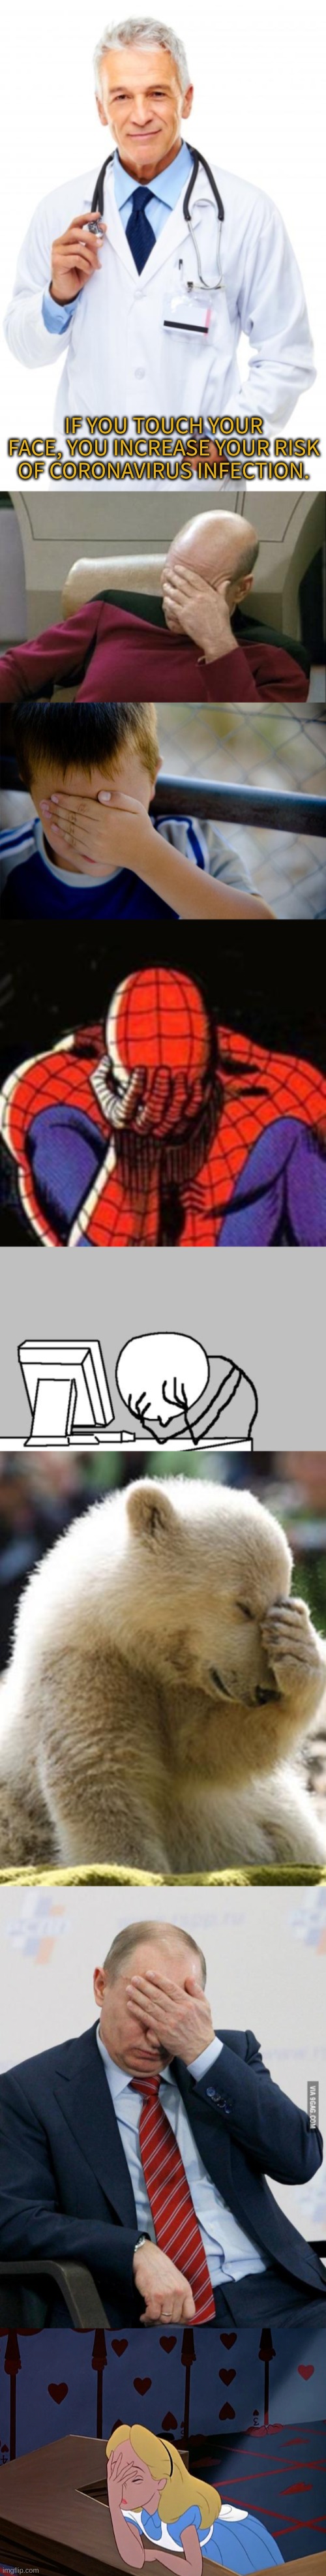 IF YOU TOUCH YOUR FACE, YOU INCREASE YOUR RISK OF CORONAVIRUS INFECTION. | image tagged in memes,sad spiderman,computer guy facepalm,captain picard facepalm,facepalm bear,confession kid | made w/ Imgflip meme maker